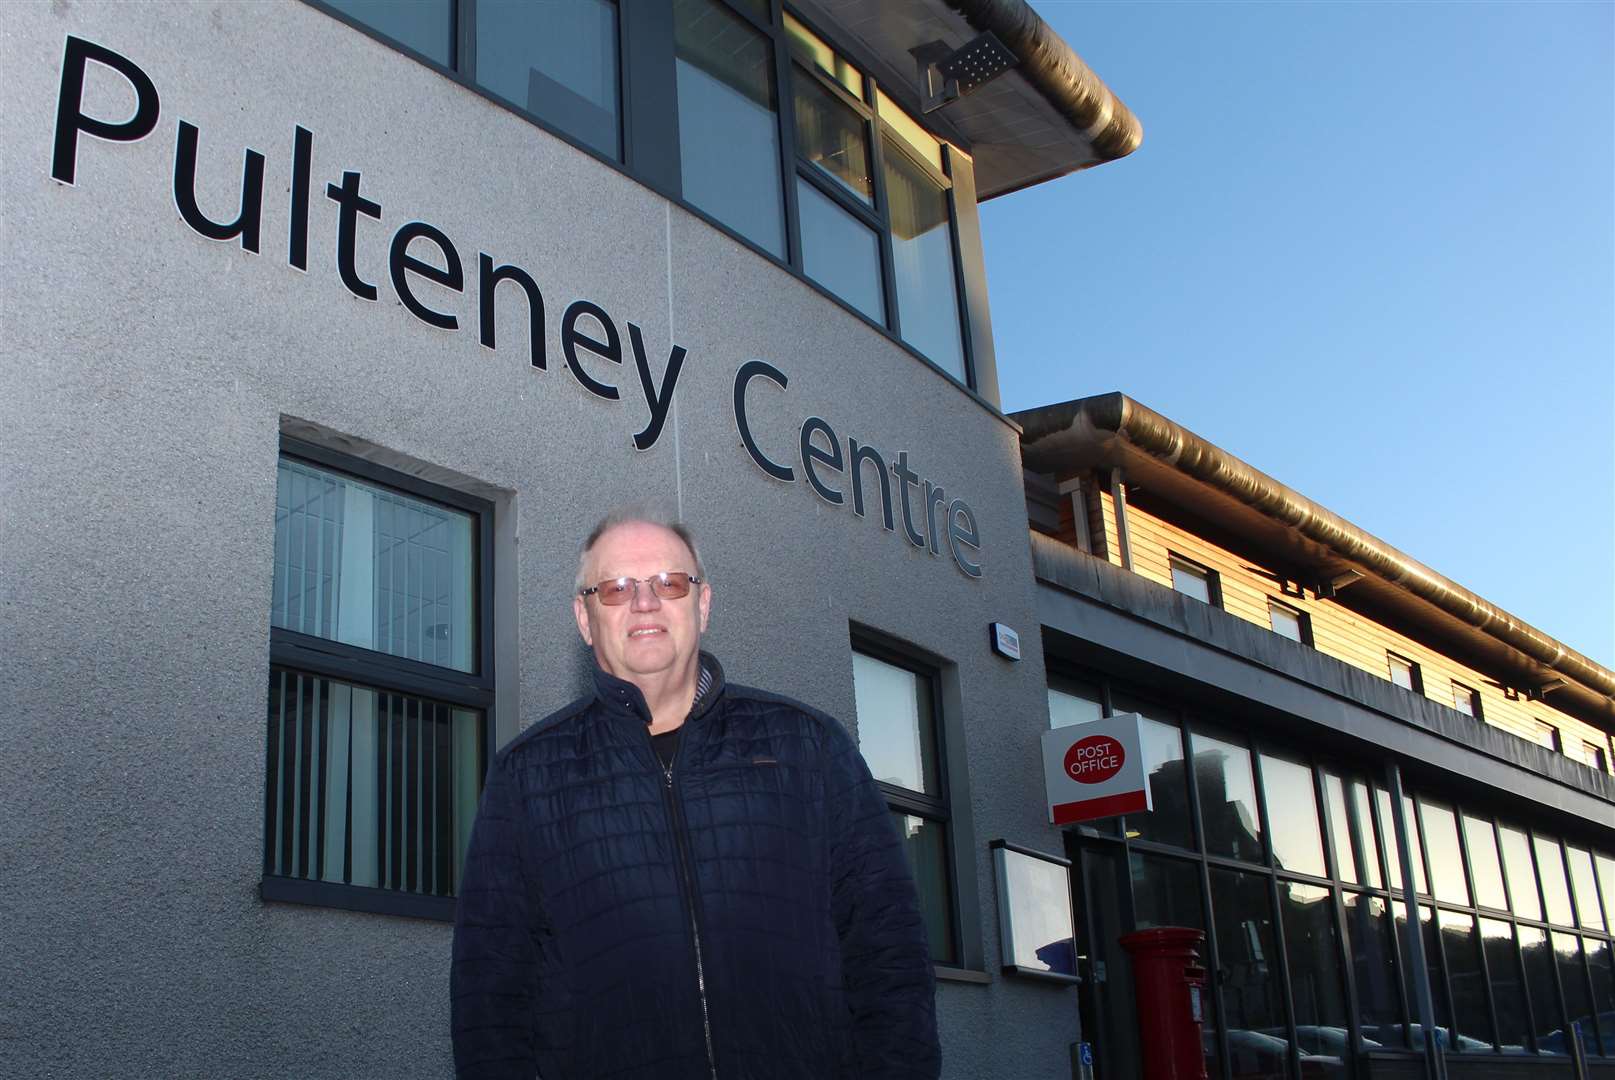 Ian Leith outside the Pulteney Centre, which will be the venue for the SAFHS conference and family history fair on Saturday, April 27.